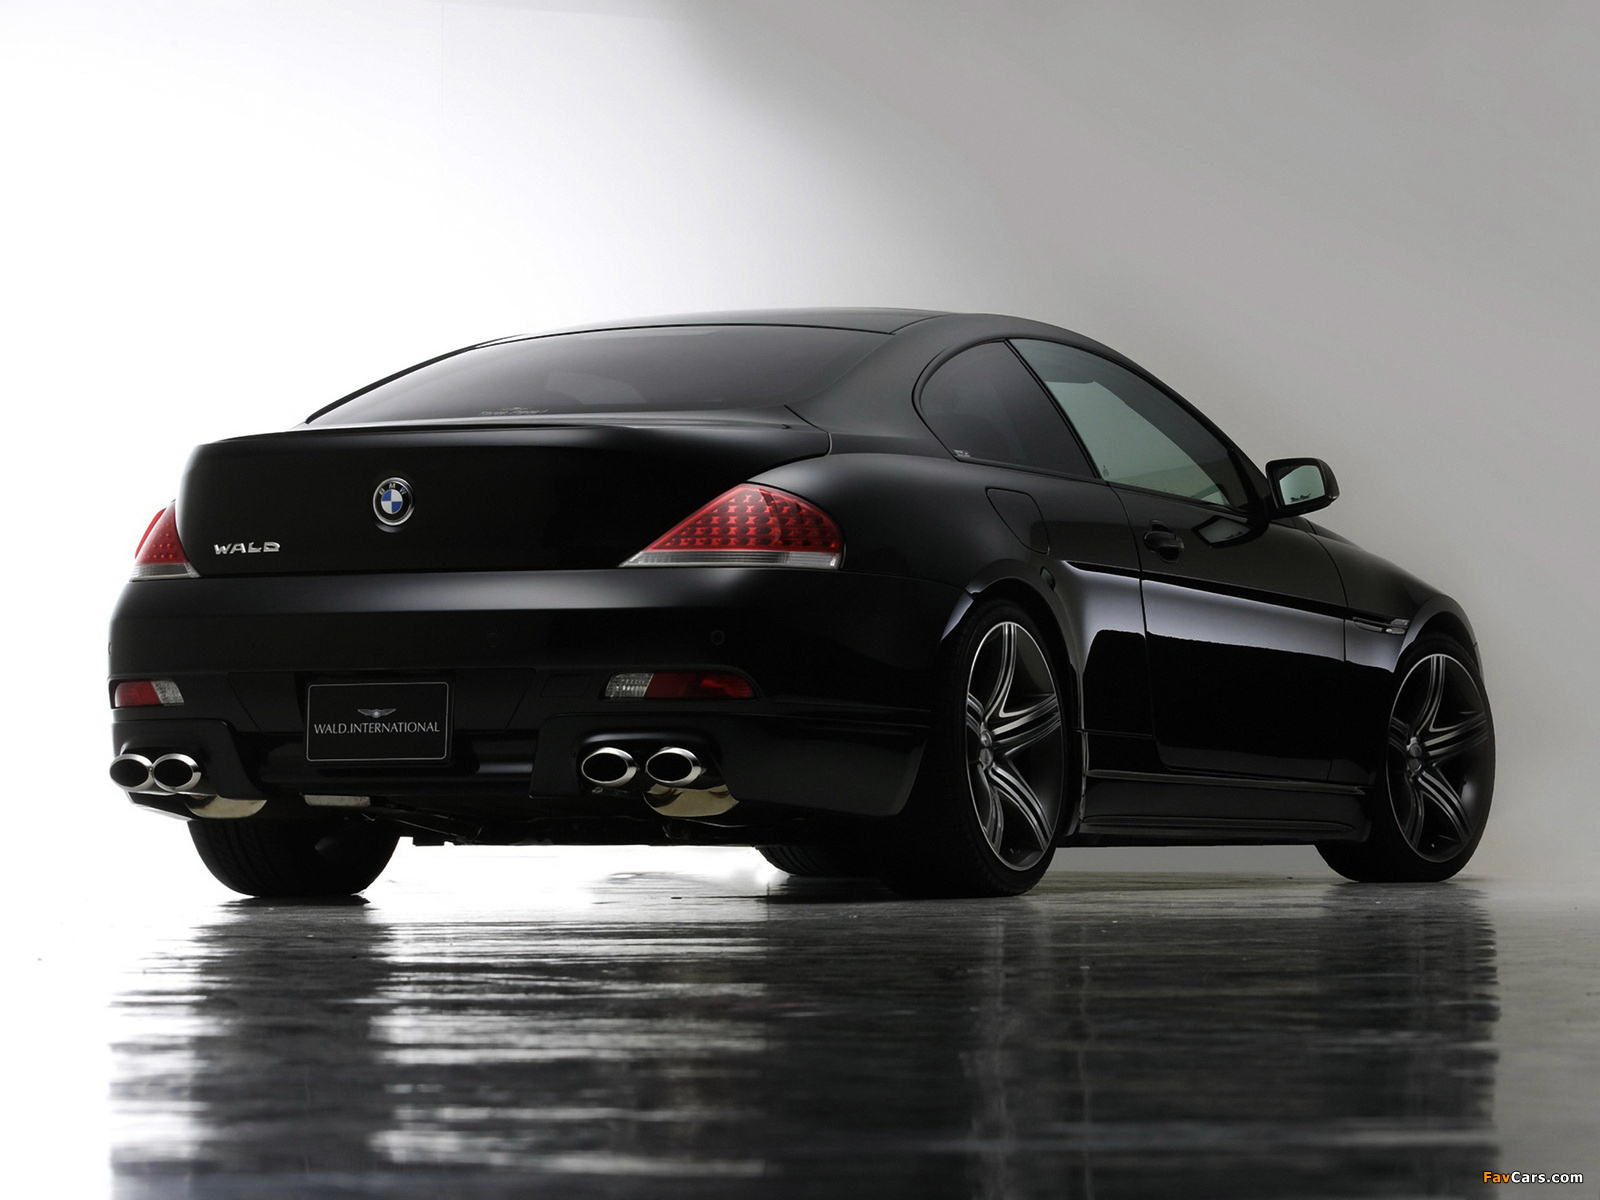 WALD BMW 6 Series (E63) 2004 pictures (1600 x 1200)